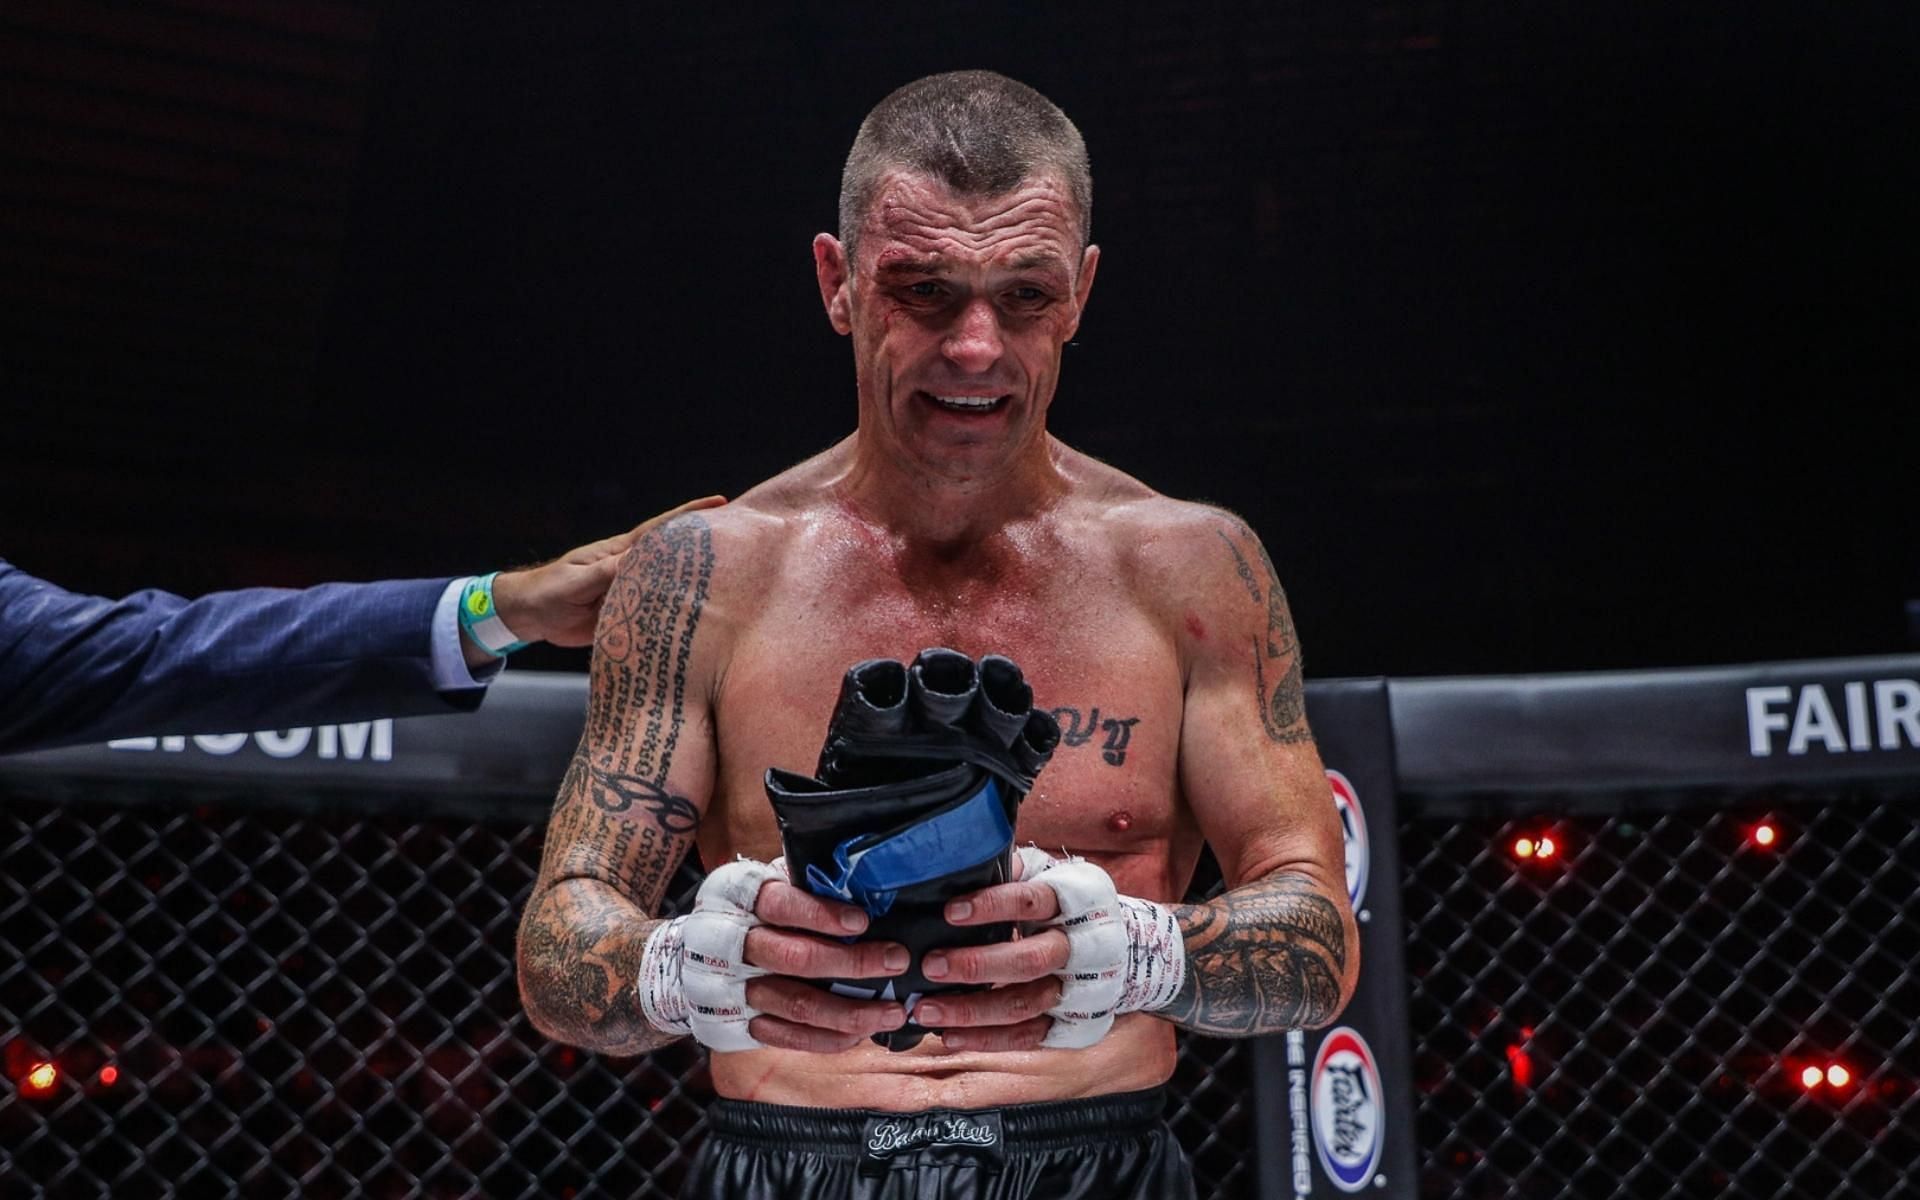 John Wayne Parr fought his final fight at ONE X. (Image courtesy of ONE Championship)